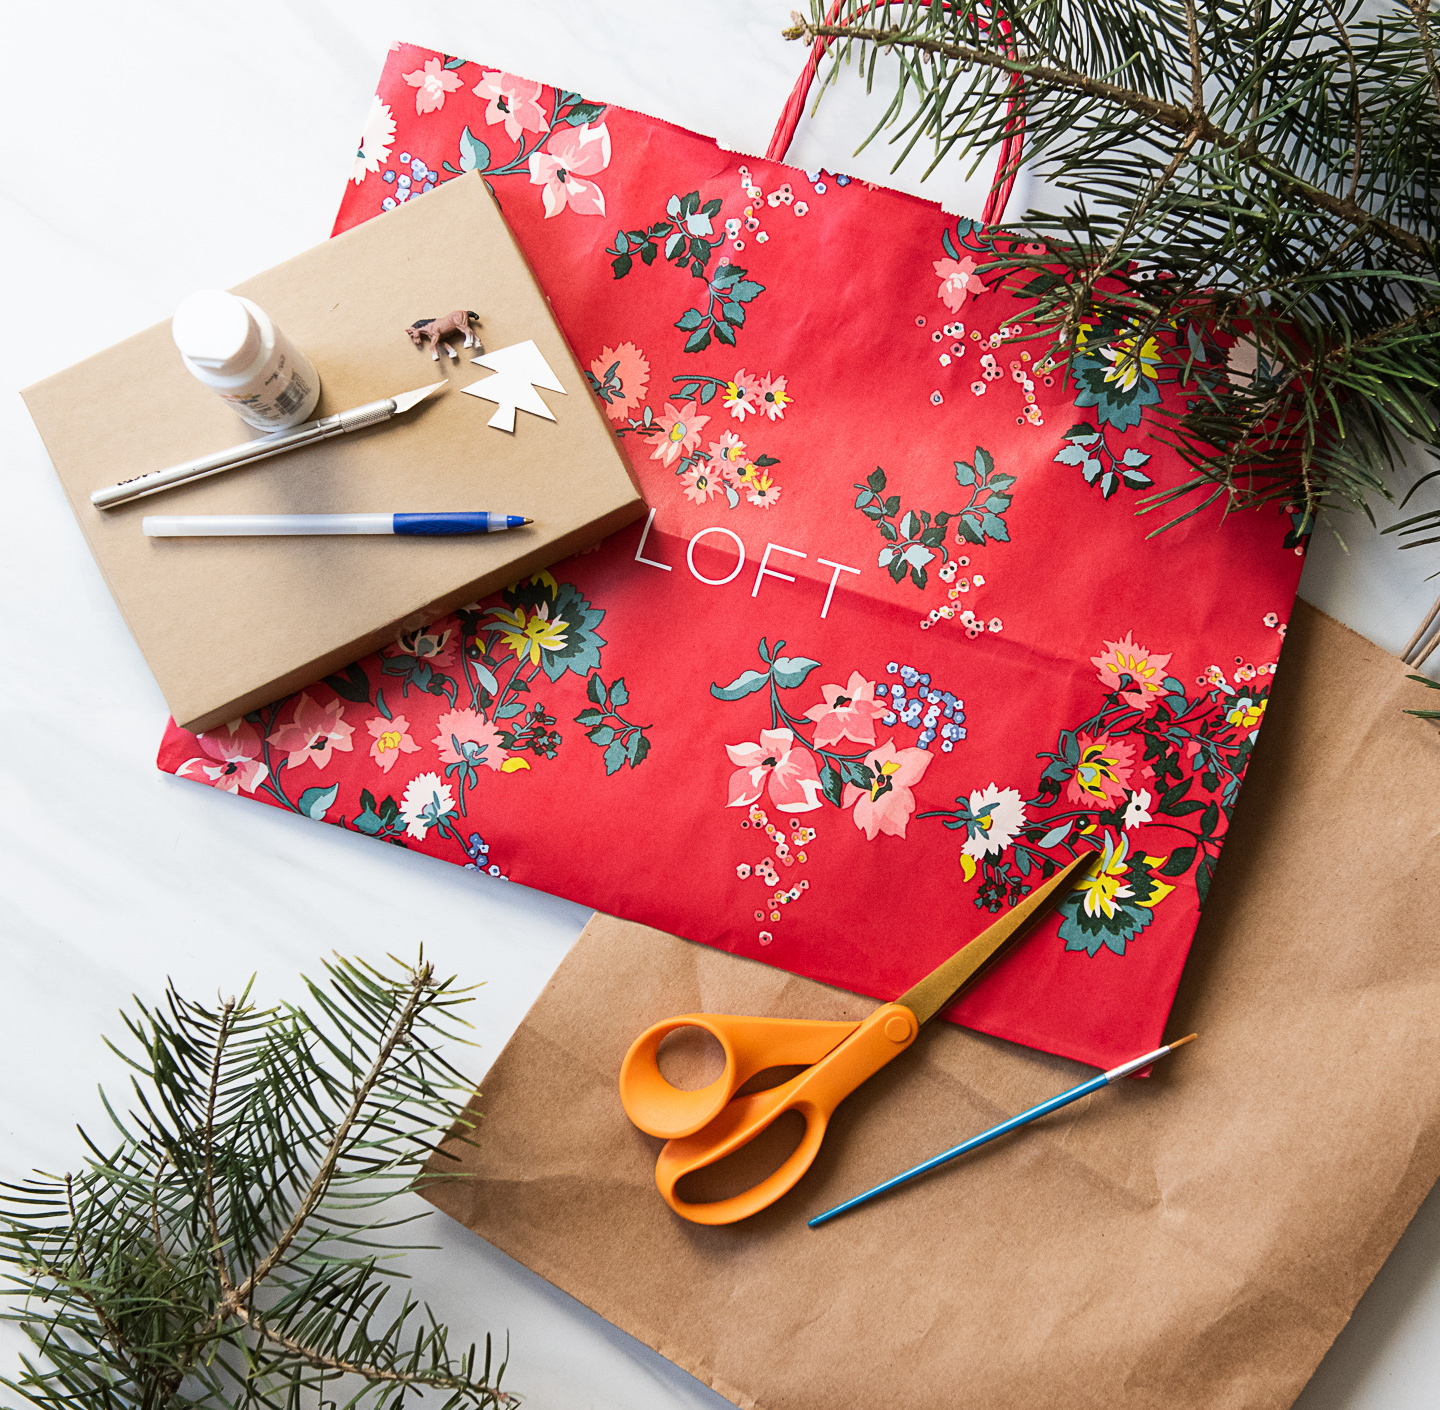 How to recycle gift wrapping paper and reduce waste during the